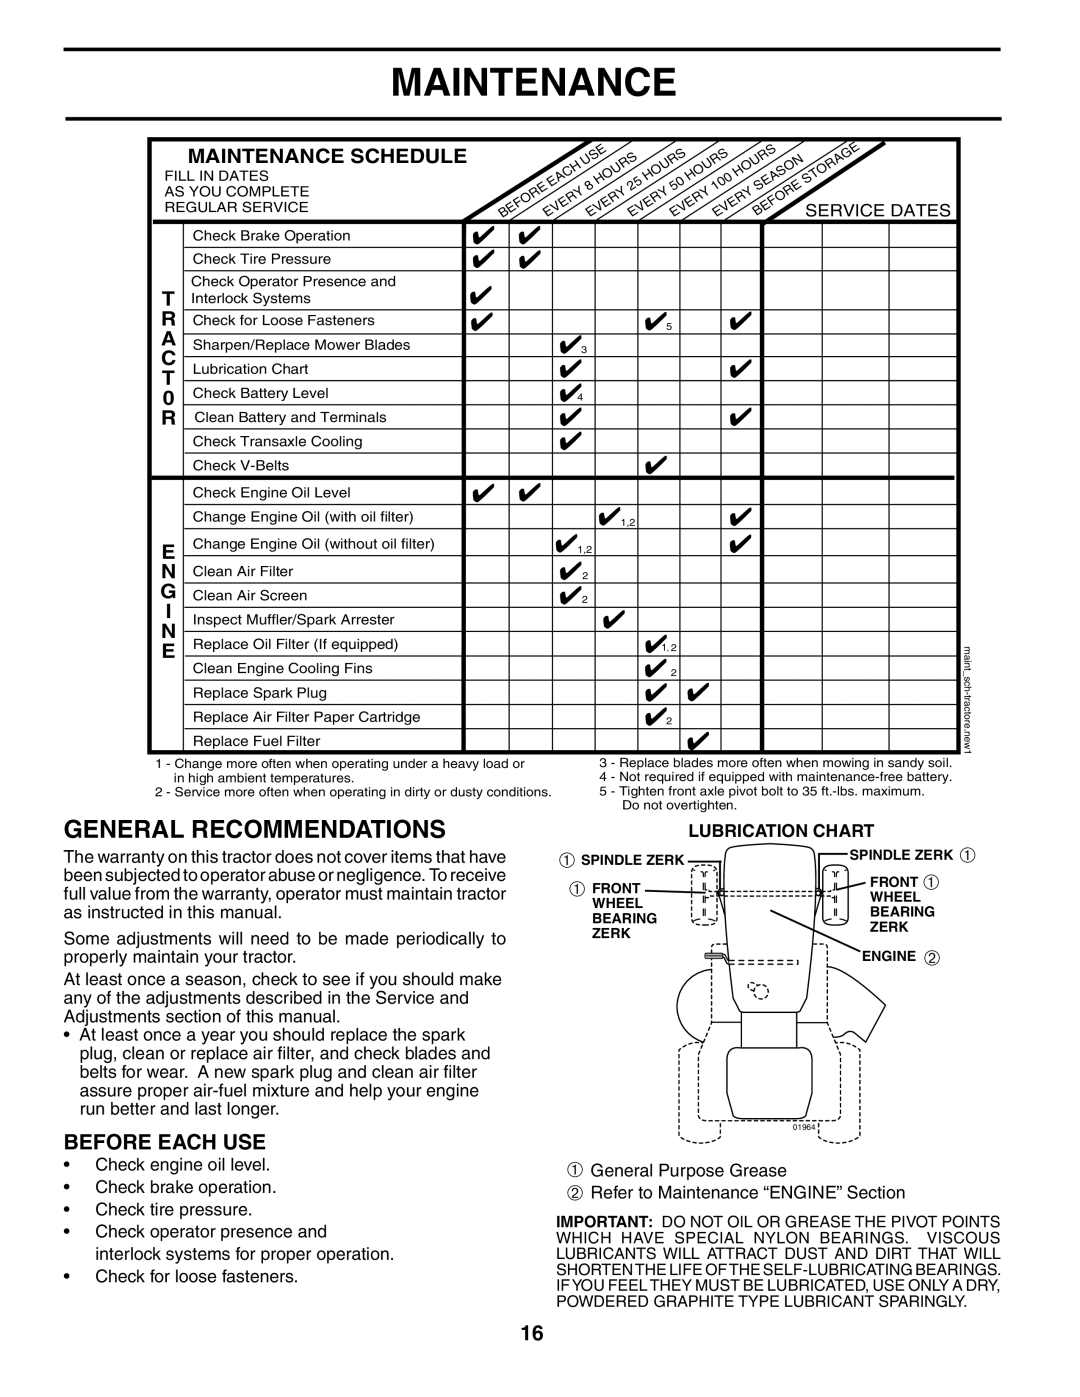 Husqvarna YTH2148 owner manual General Recommendations, Before Each Use, Maintenance Schedule 